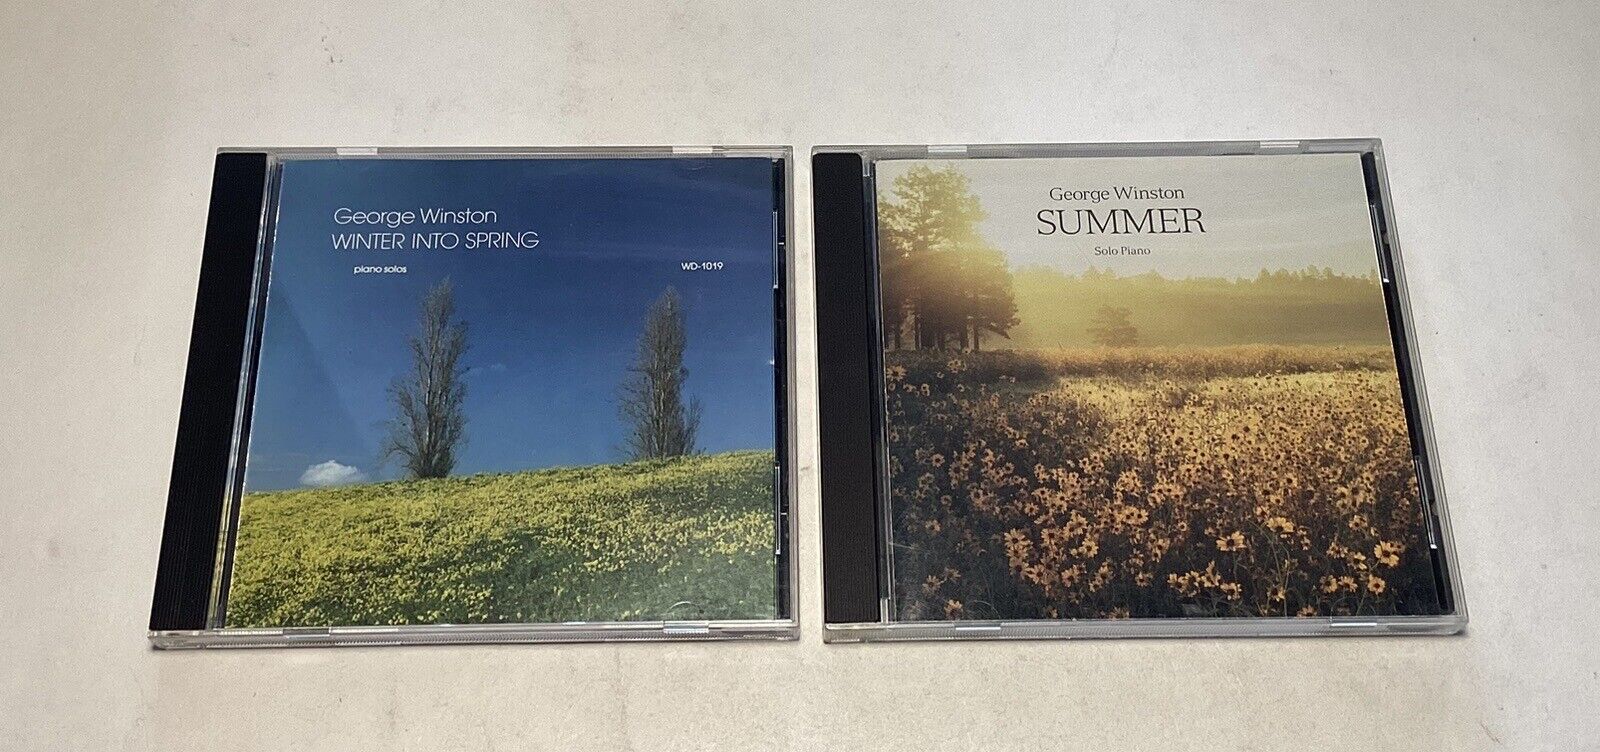 Winter into Spring Summer CD CDs LOT George Winston Windham Hill Records piano